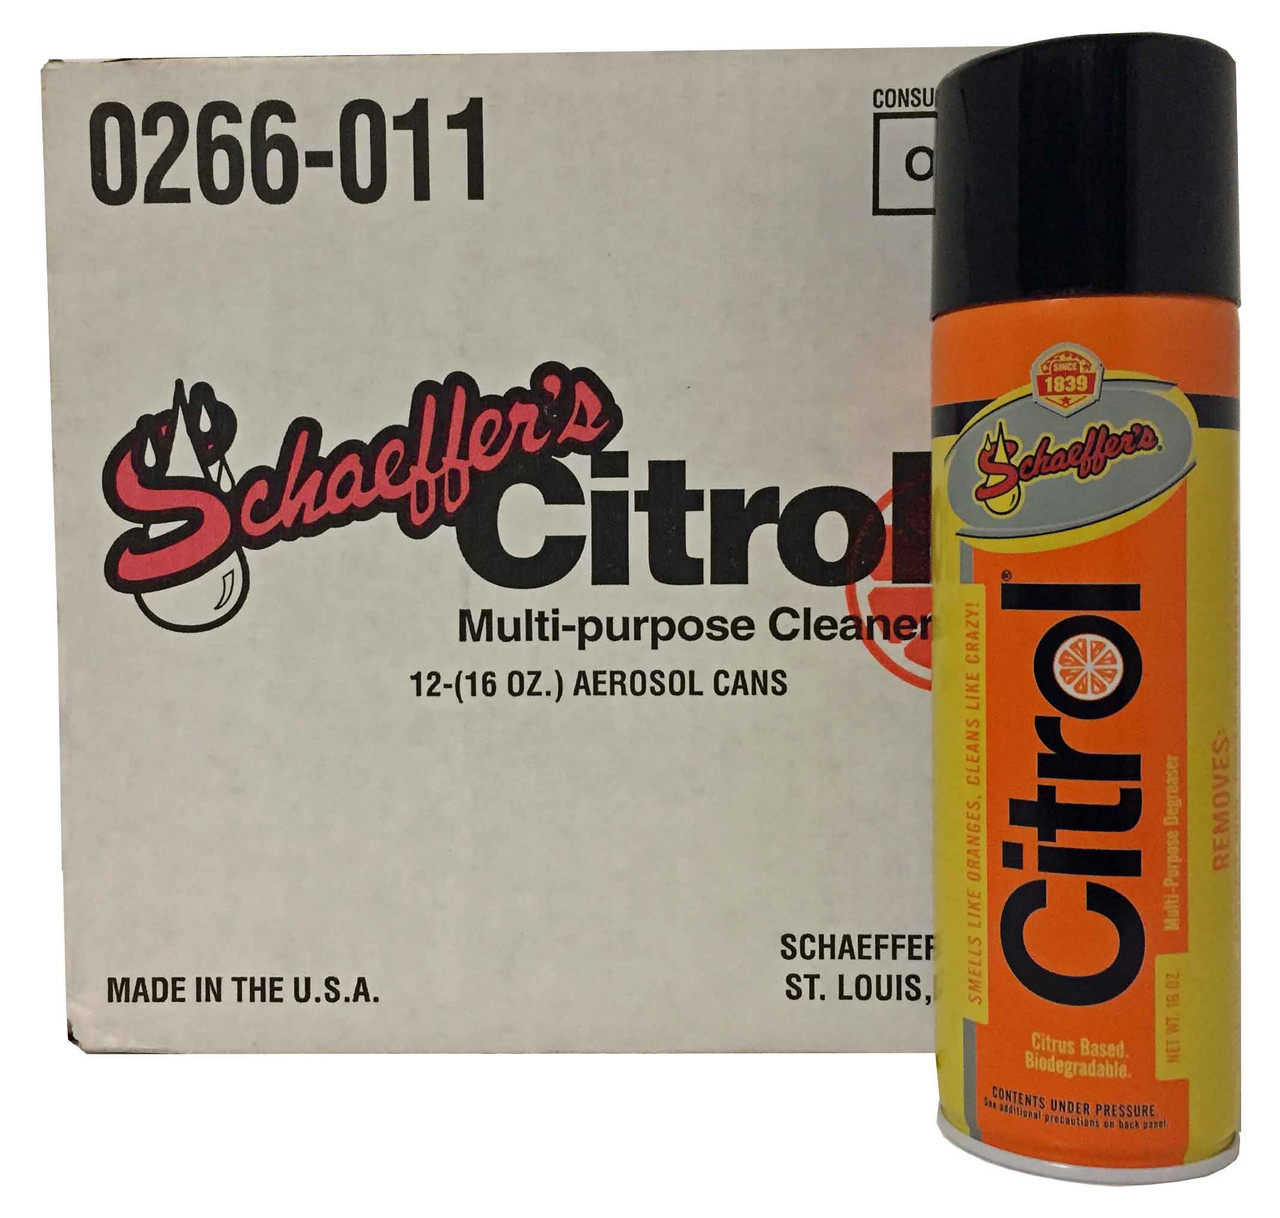 Schaeffer 266-011 Citrol Cleaner and Industrial Degreaser (12-16oz Cans)